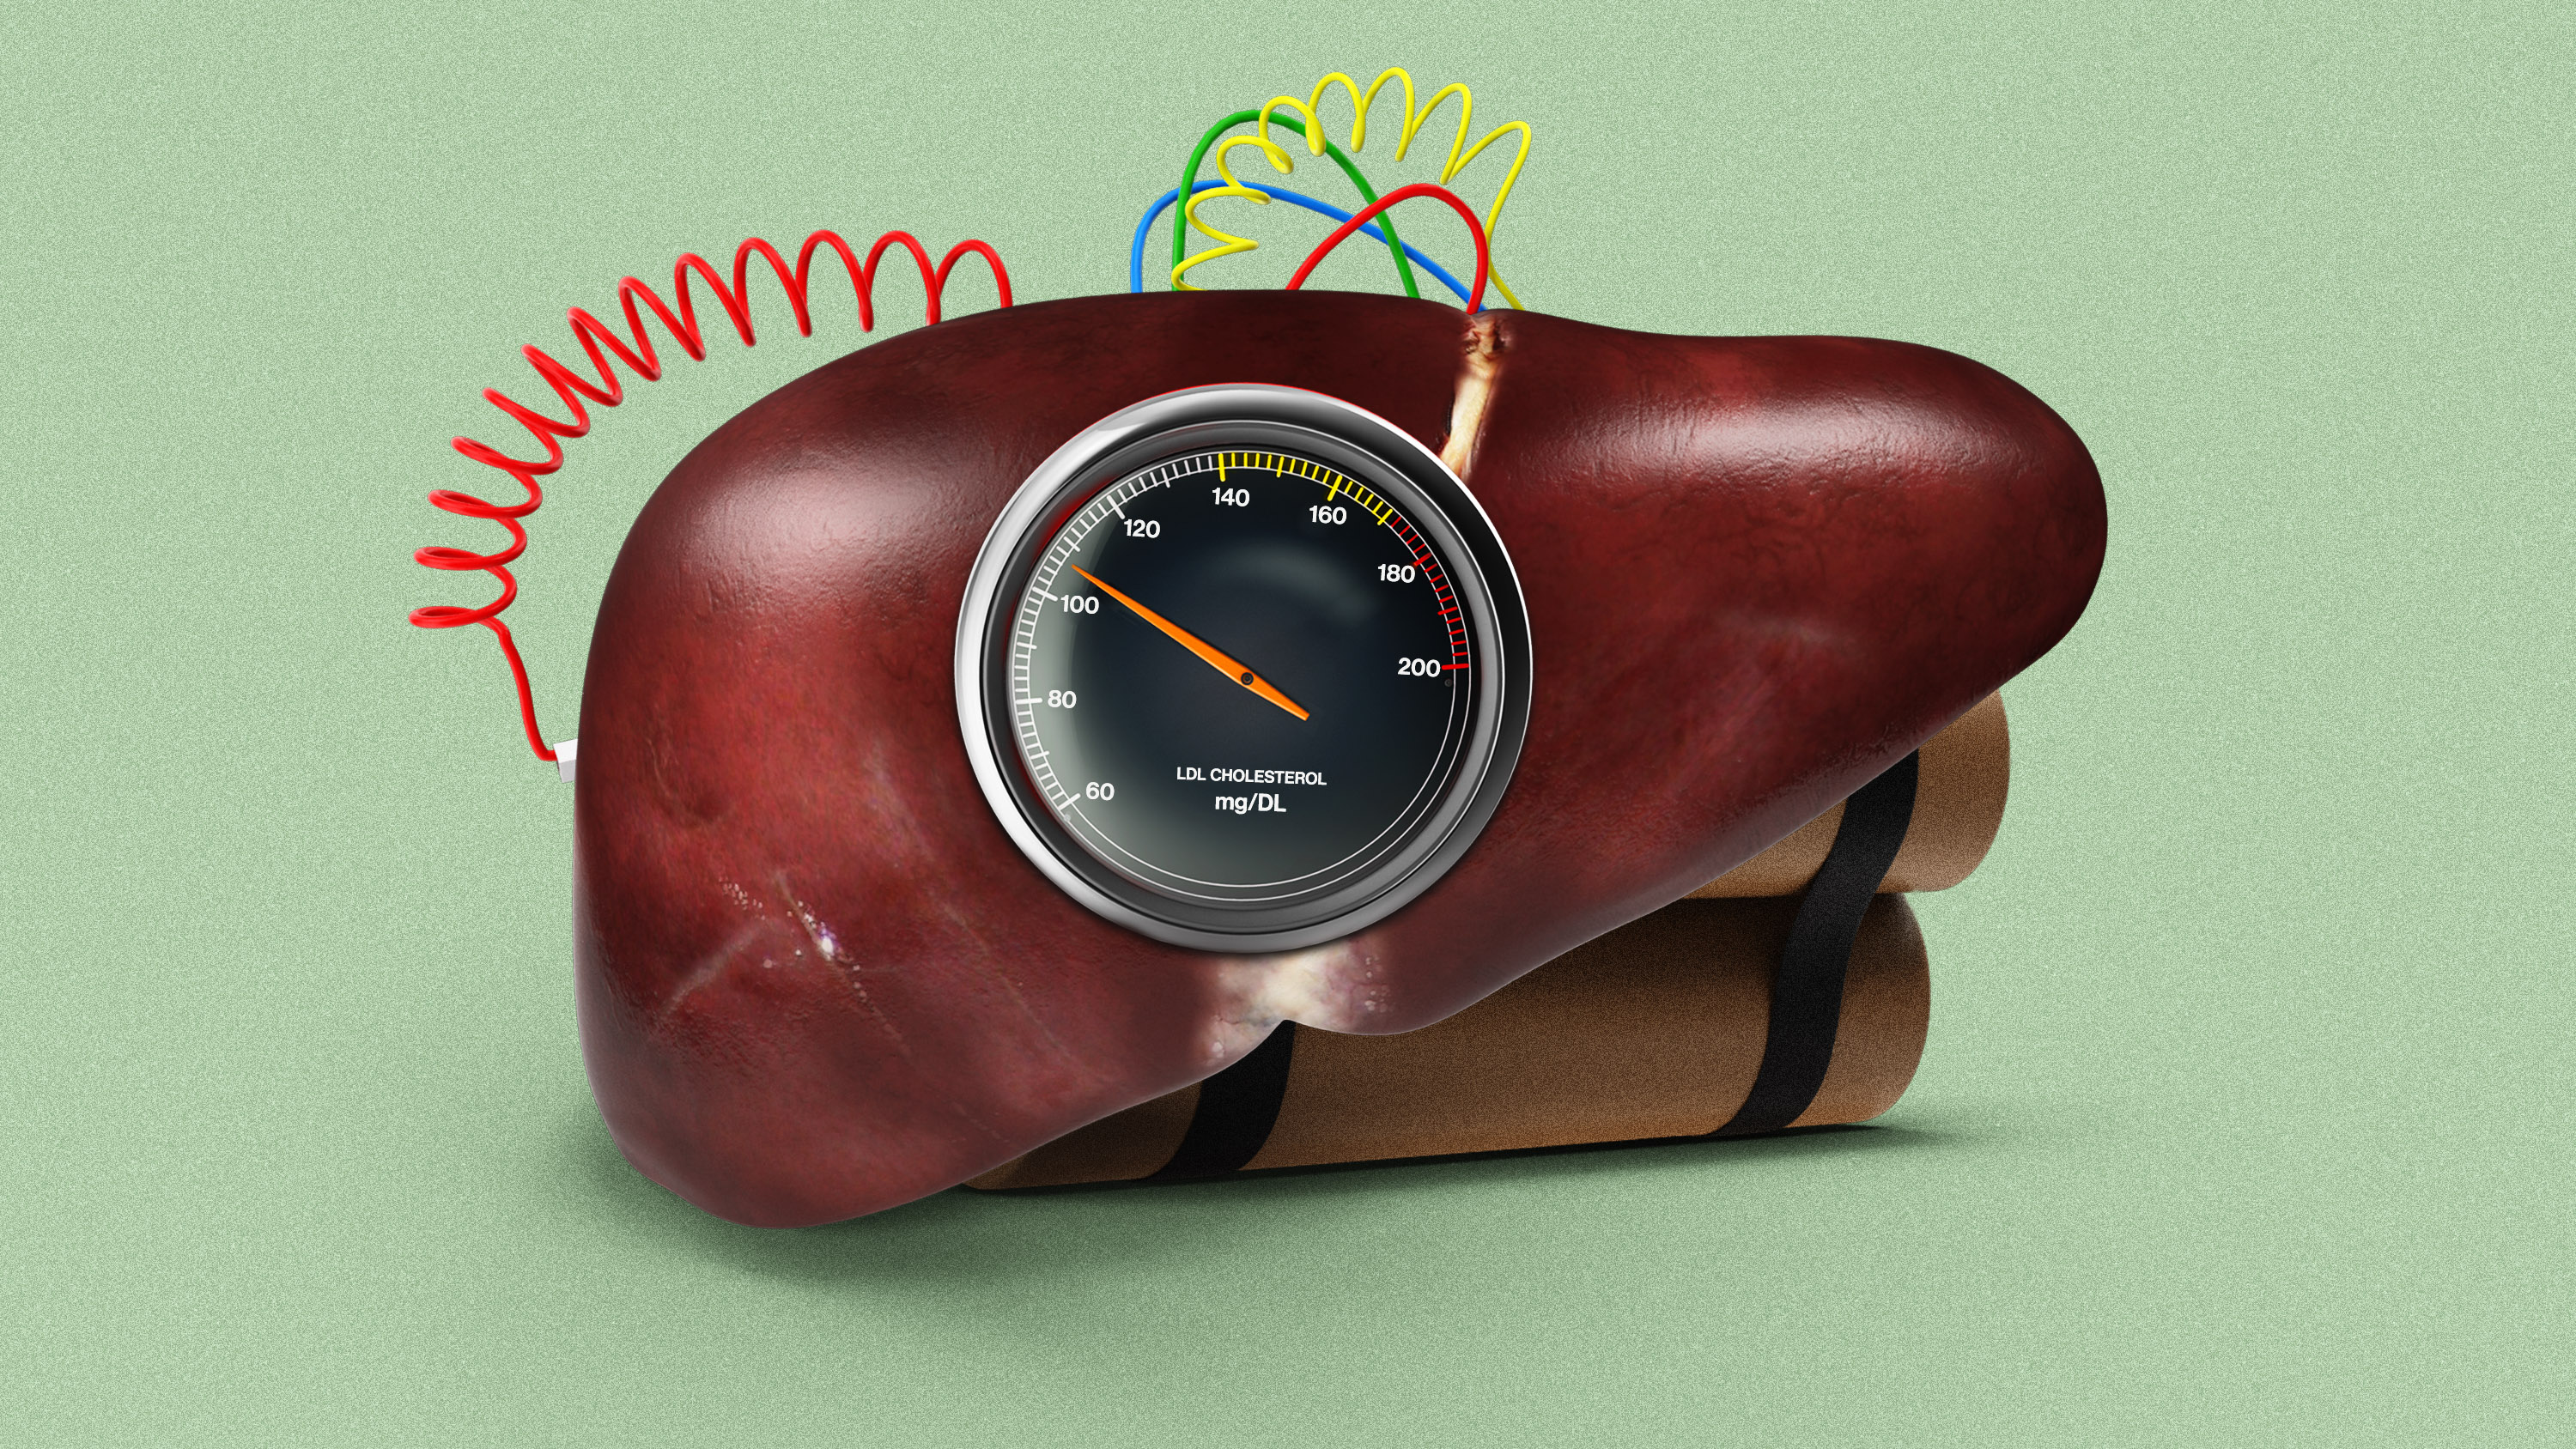 LDL cholesterol meter rigged to a liver